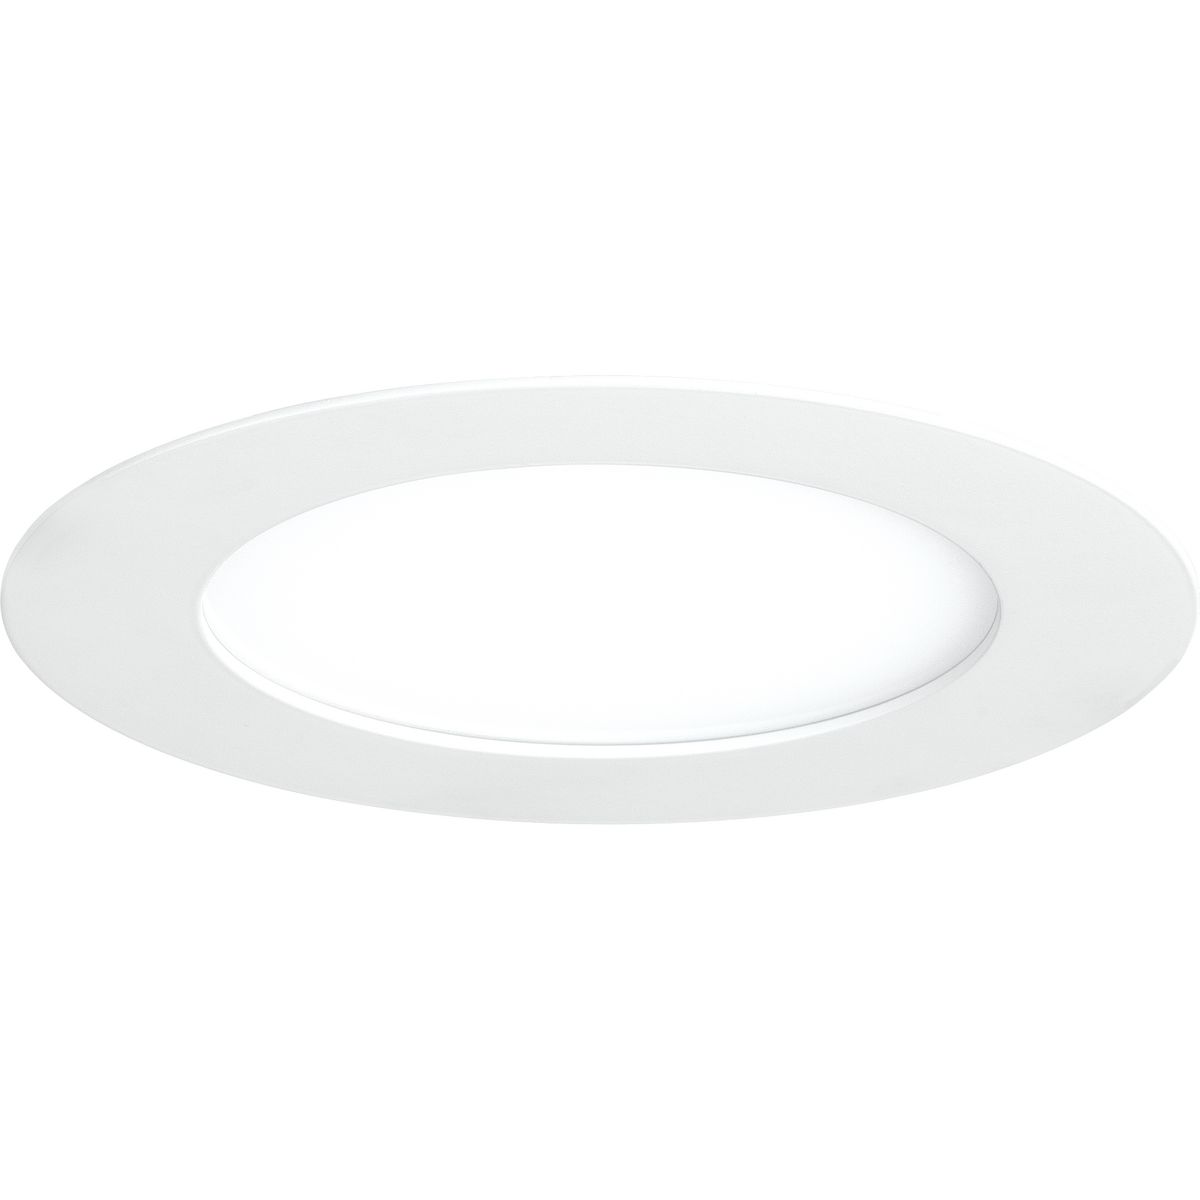 7 in Slim, low profile recessed downlight combines innovative technology, aesthetics, functionality and affordability. No housing or J-Box required for installation and wet location listed provides the ultimate flexibility. The low profile downlight is ideal for many residential, multi-family, commercial and hospitality applications. Featuring a detachable driver box, which can be mounted remotely for shallow ceiling installations. Energy efficient design provides up to a 75 percent energy savings and up to 54,000 hours of LED life. Flicker free dimming down to 10percent with many Forward Phase Triac and Electronic Low Voltage ELV dimmers. White finish.